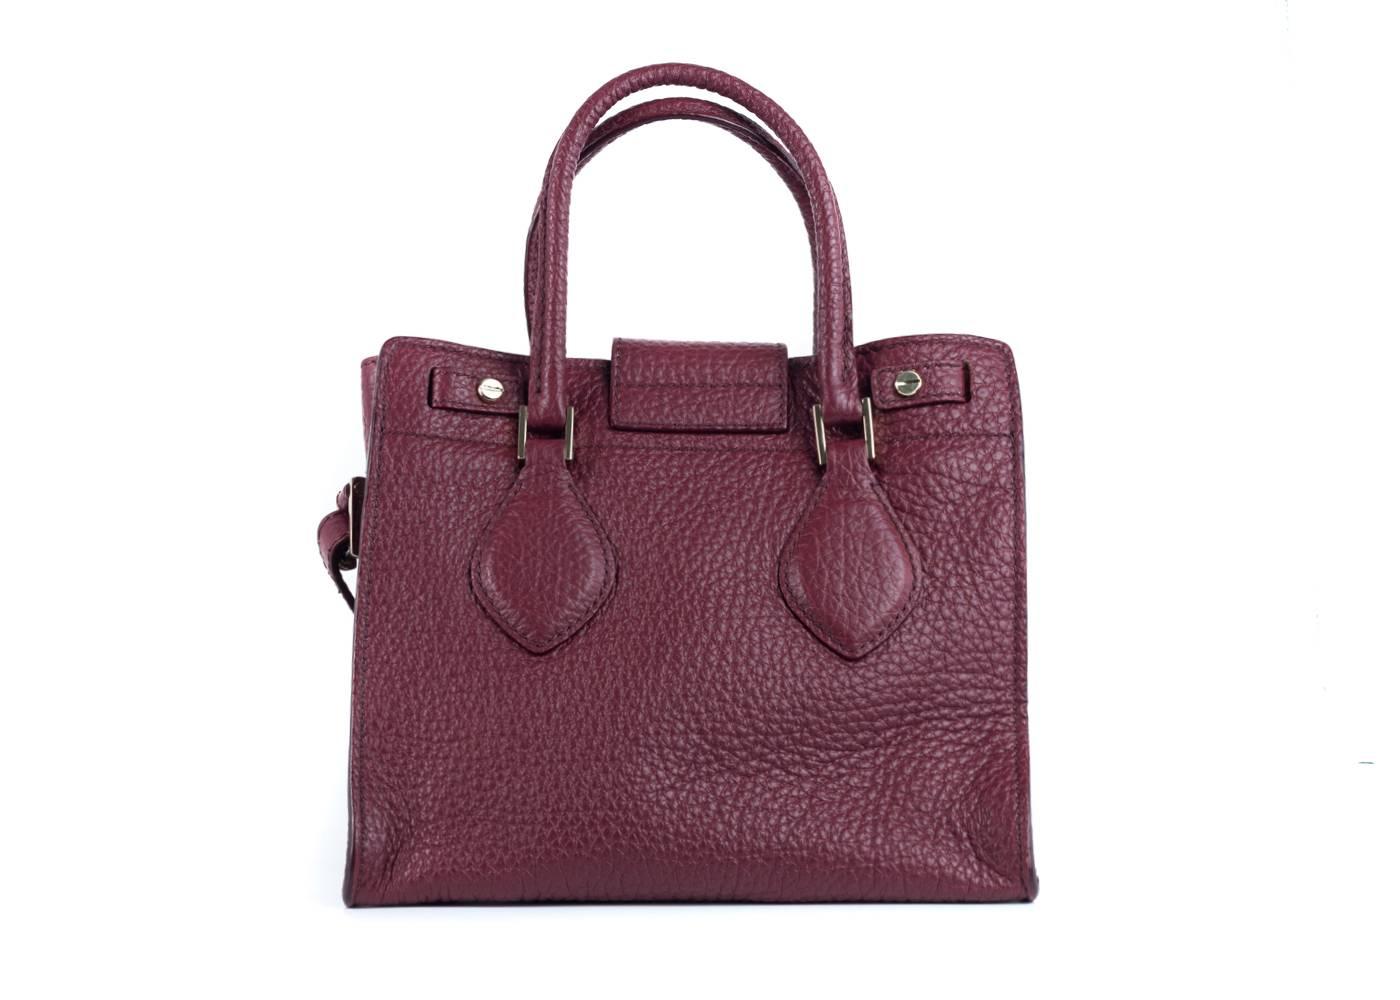 Roberto Cavalli Women's Garnet Red Textured Leather Satchel In New Condition For Sale In Brooklyn, NY